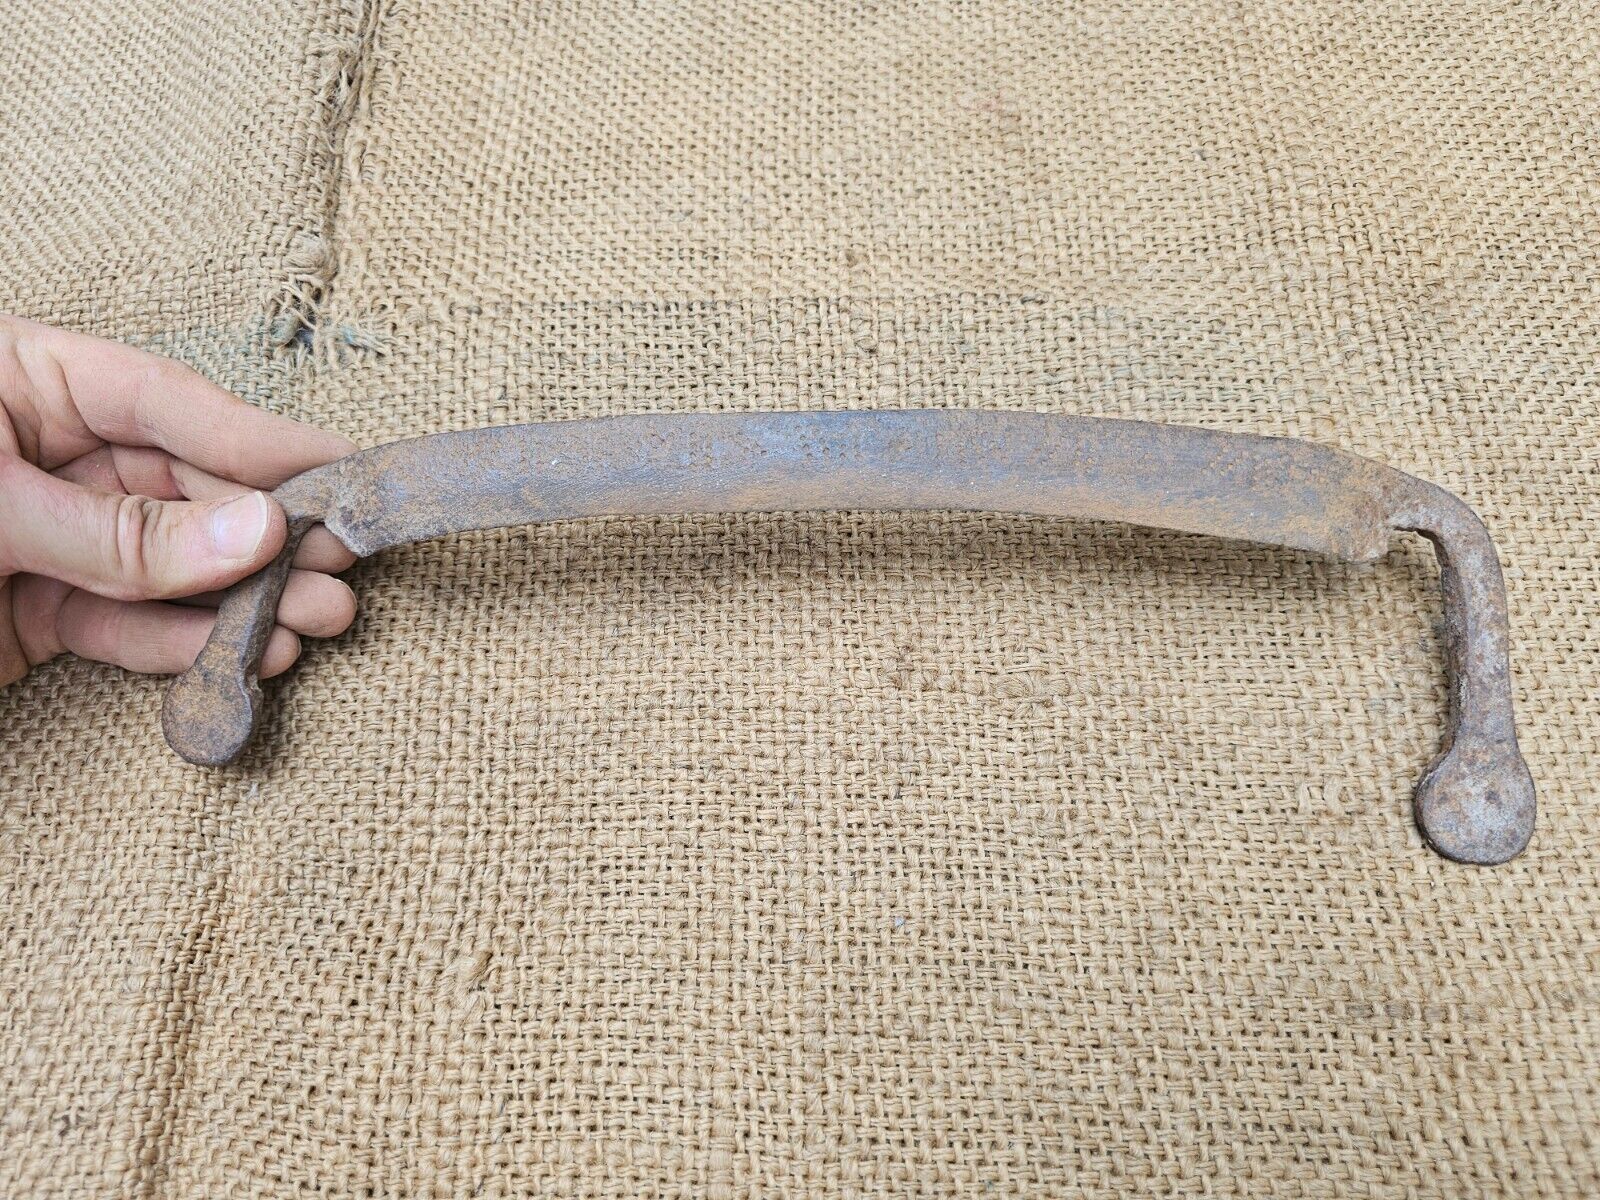 ANTIQUE HAND FORGED VINATGE WOODWORKING SCORP COOPERS SHAVE DRAWKNIFE TOOL